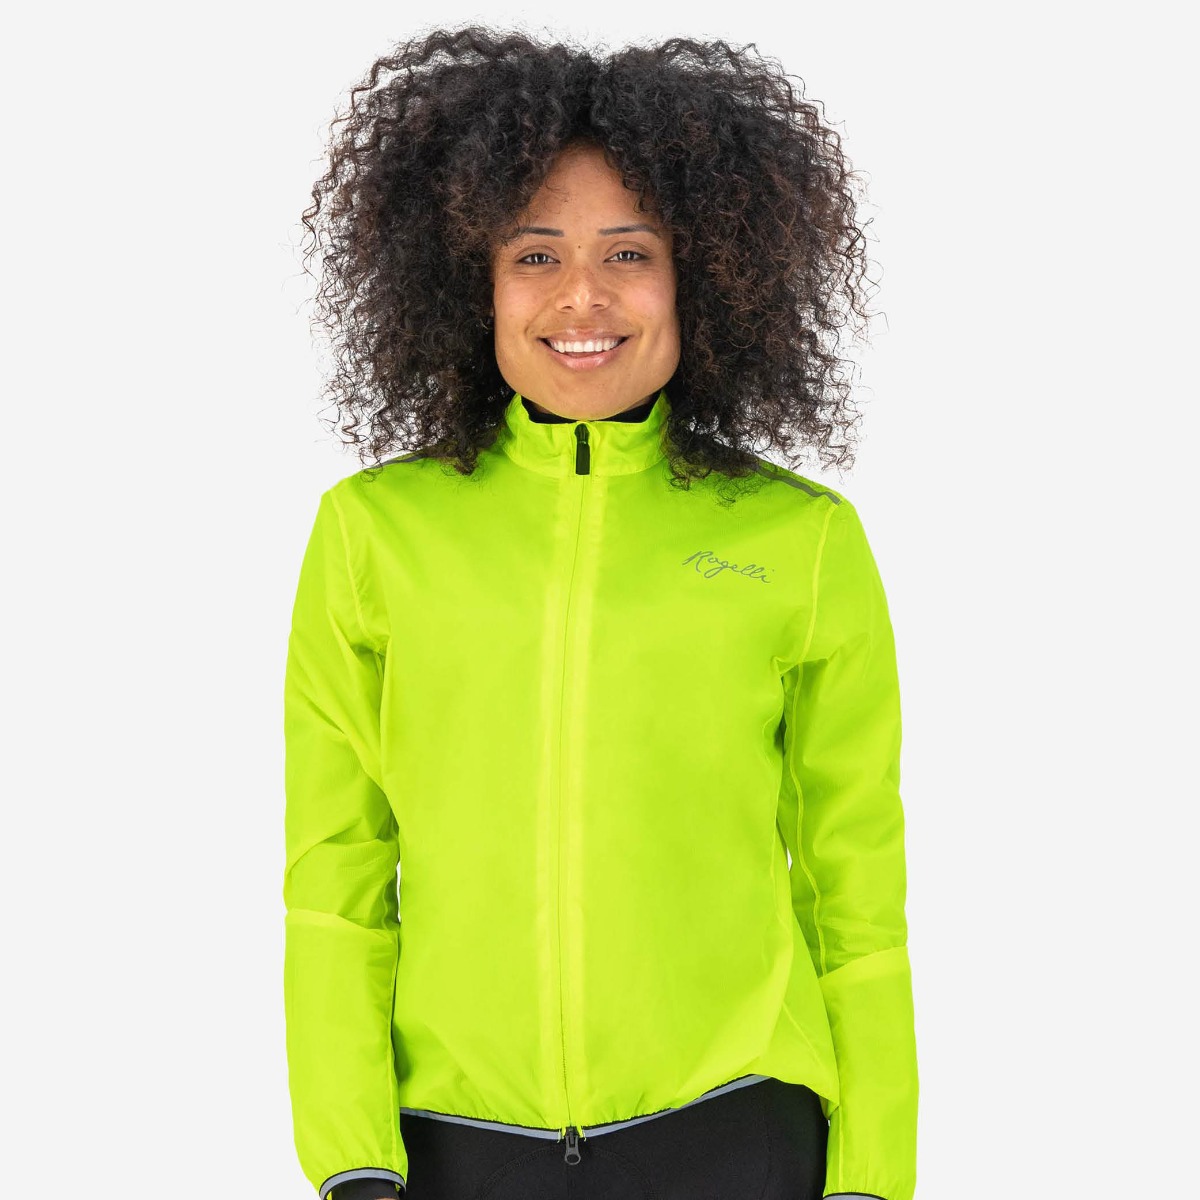 Woman wearing the Rogelli Essential rain jacket, providing protection against rain and splashing water with its extended back panel